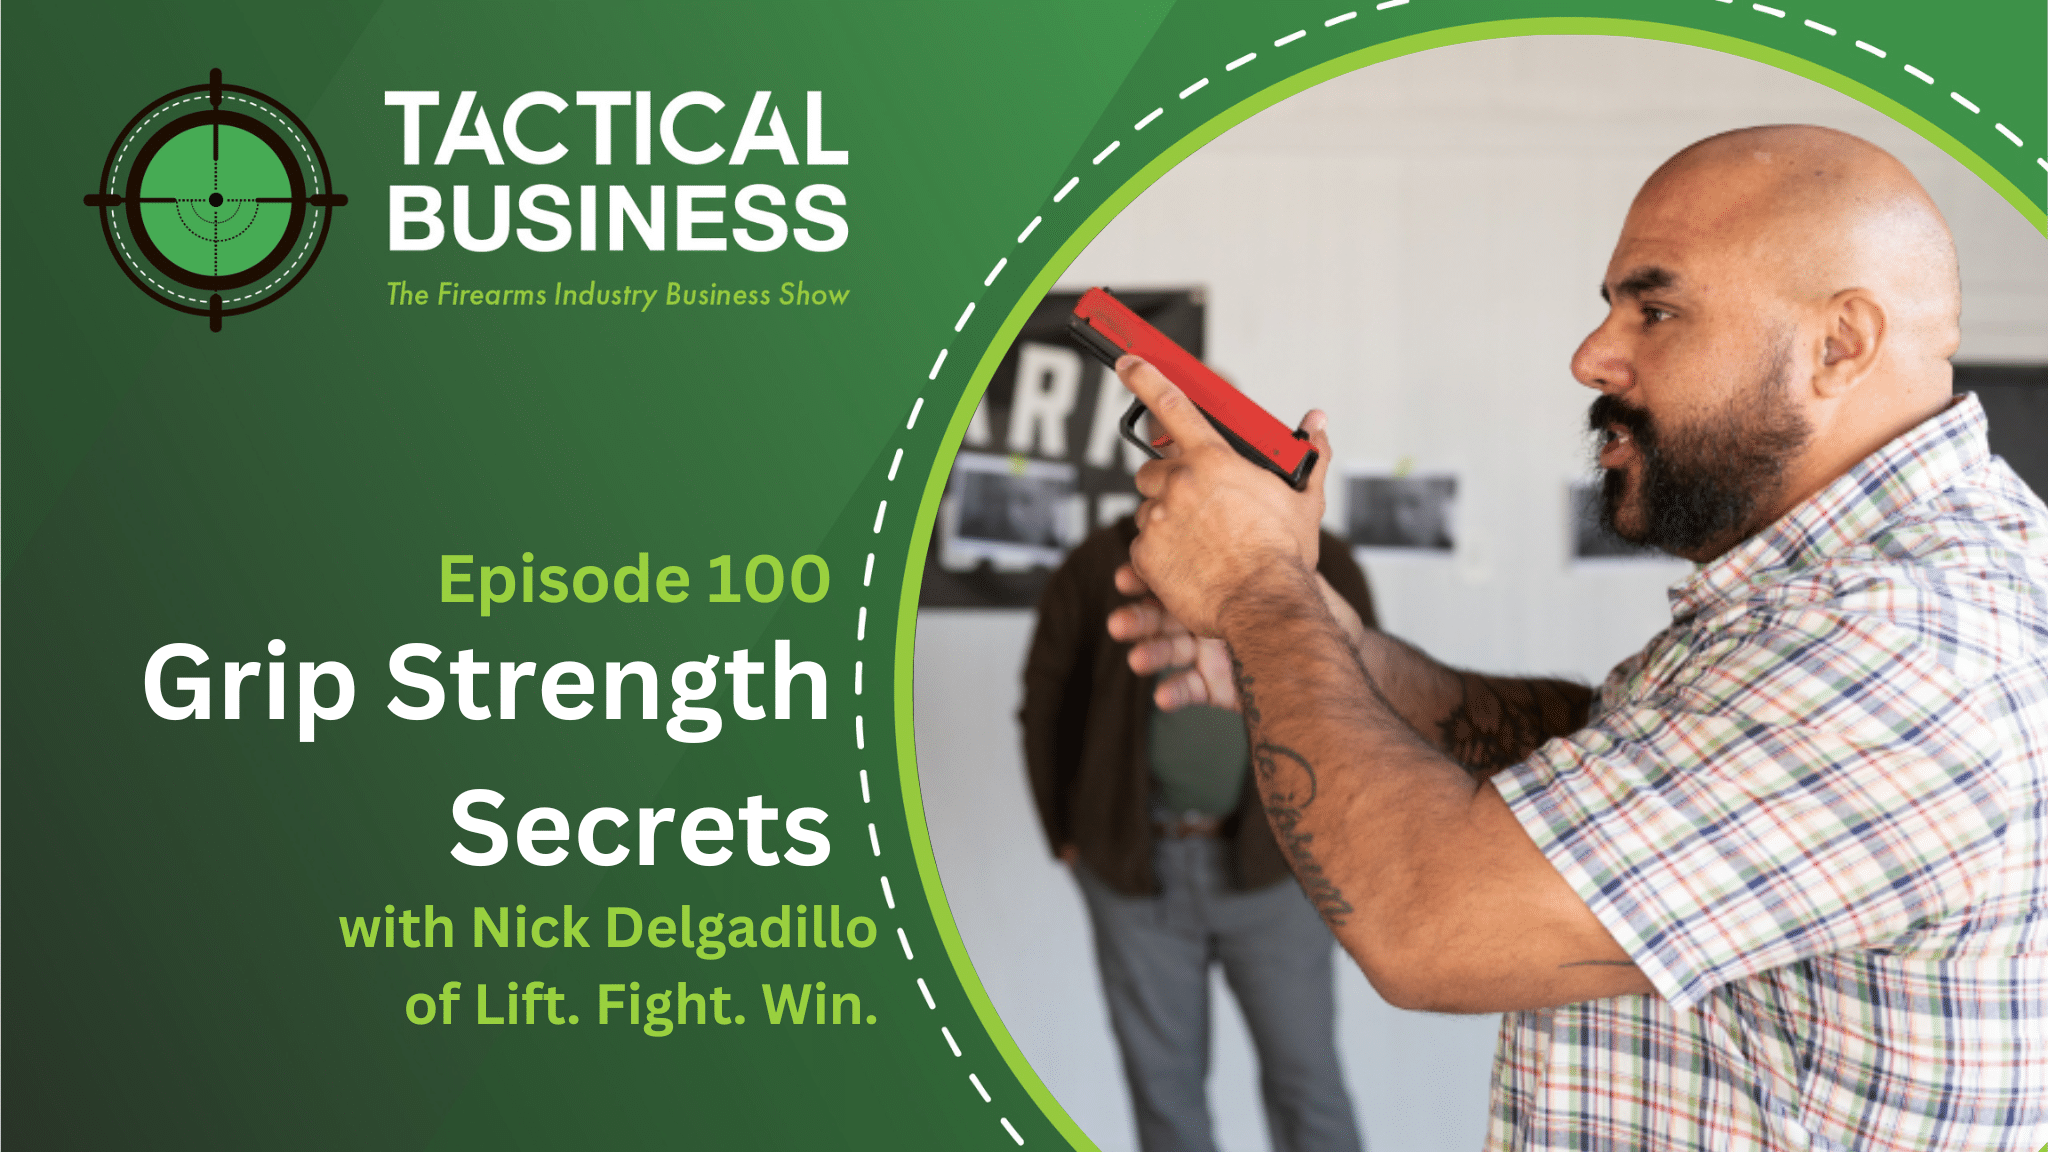 Grip Strength Secrets with Nick Delgadillo of Lift. Fight. Win.